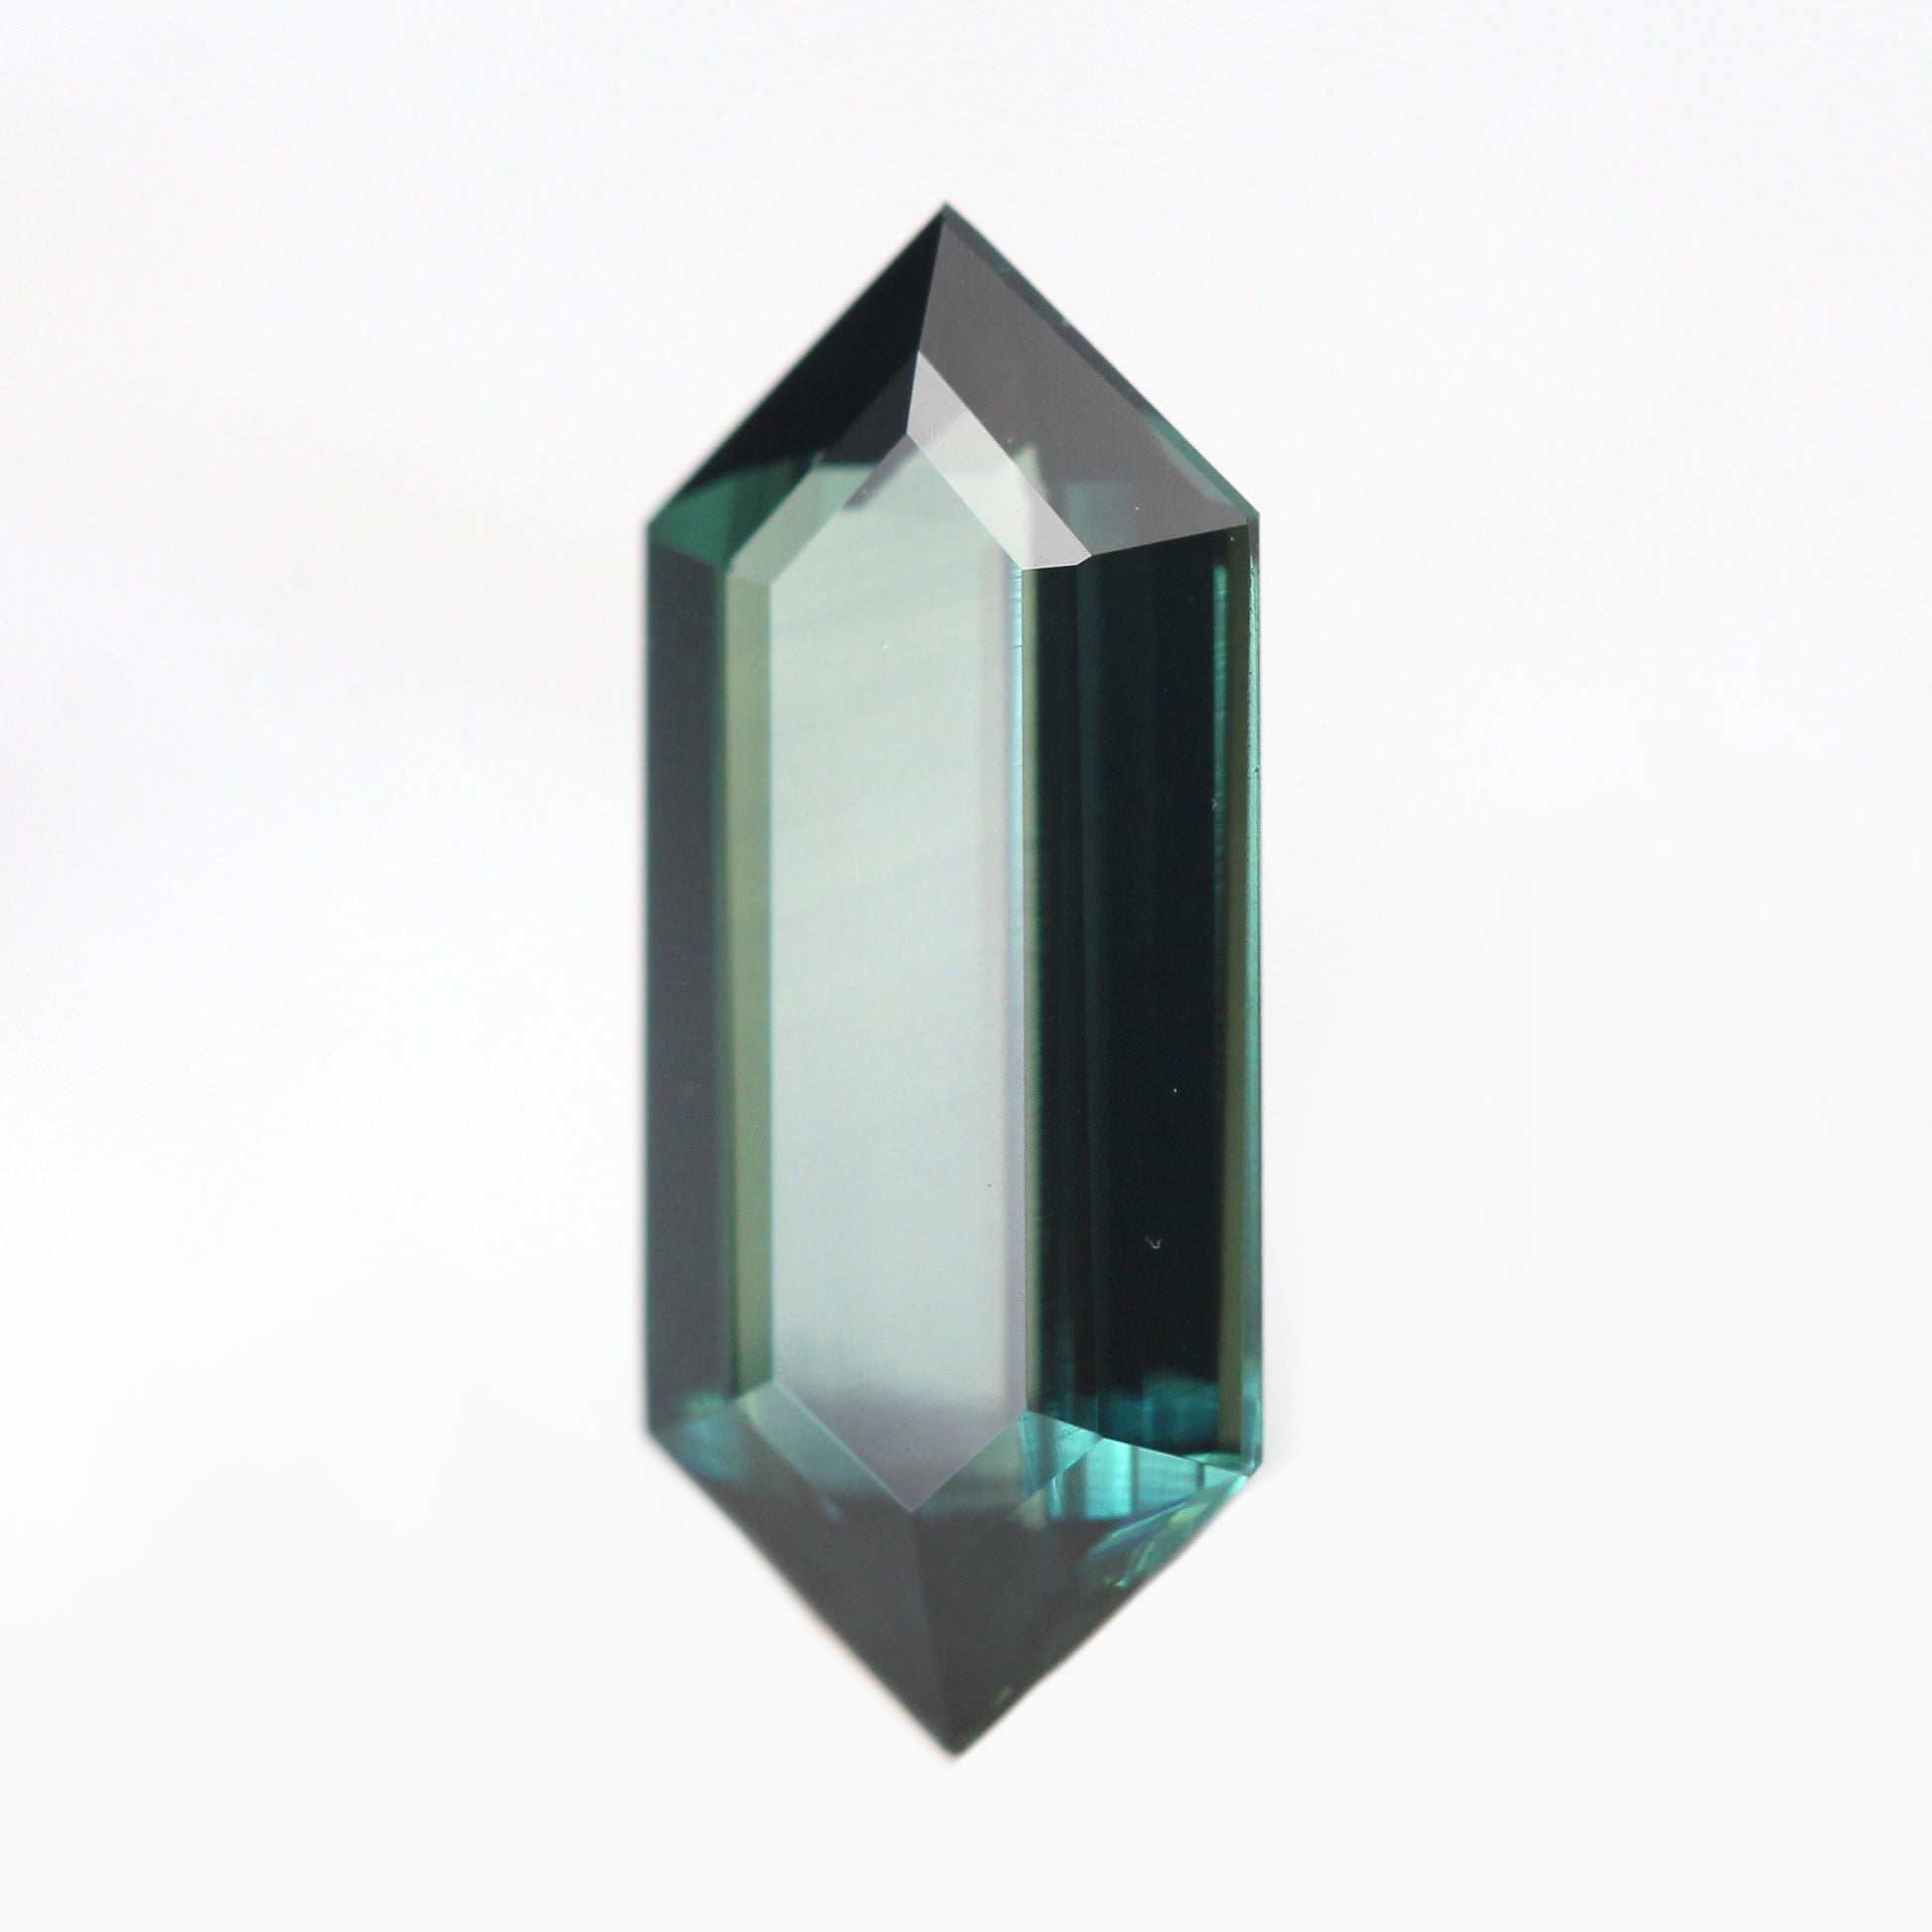 1.44 Carat Teal Green Elongated Hexagon Madagascar Sapphire for Custom Work - Inventory Code THS144 - Midwinter Co. Alternative Bridal Rings and Modern Fine Jewelry